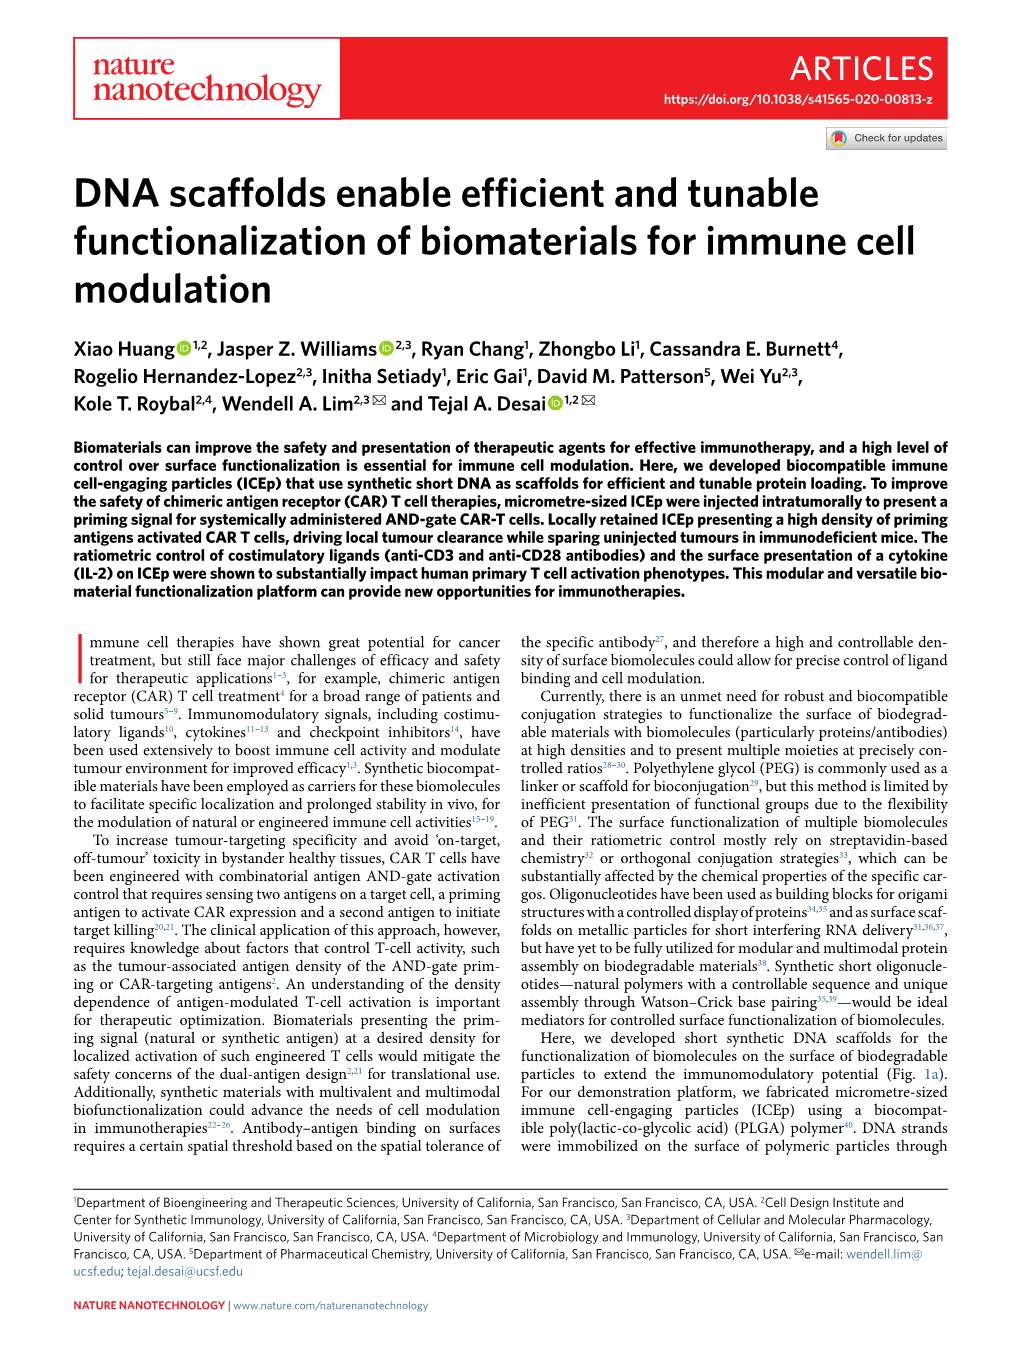 DNA Scaffolds Enable Efficient and Tunable Functionalization of Biomaterials for Immune Cell Modulation